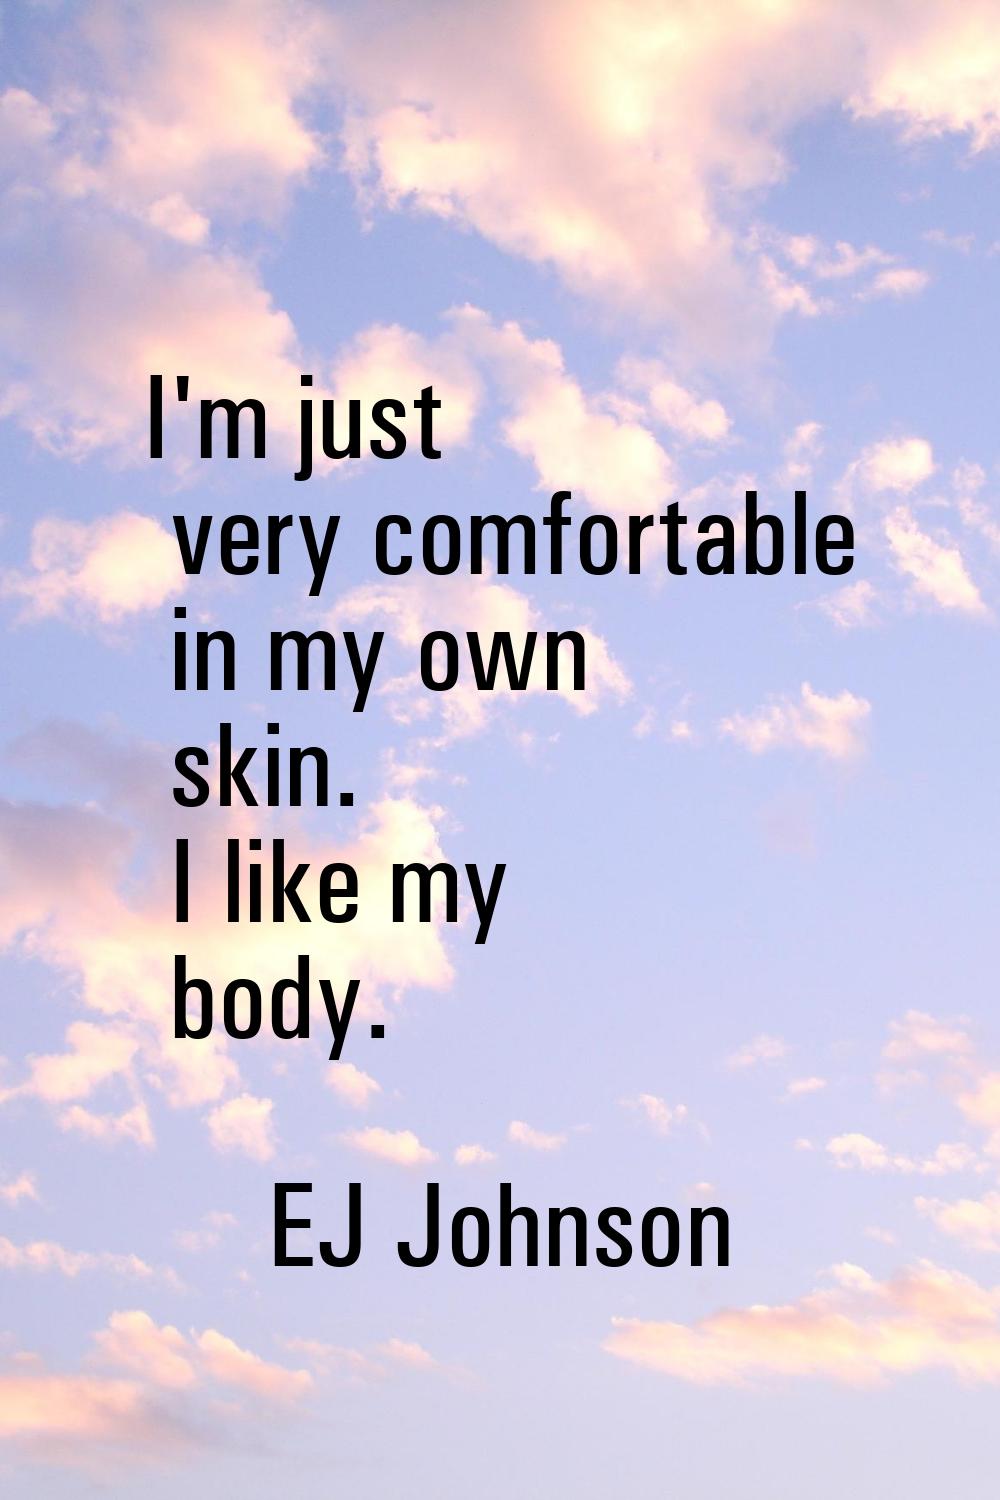 I'm just very comfortable in my own skin. I like my body.